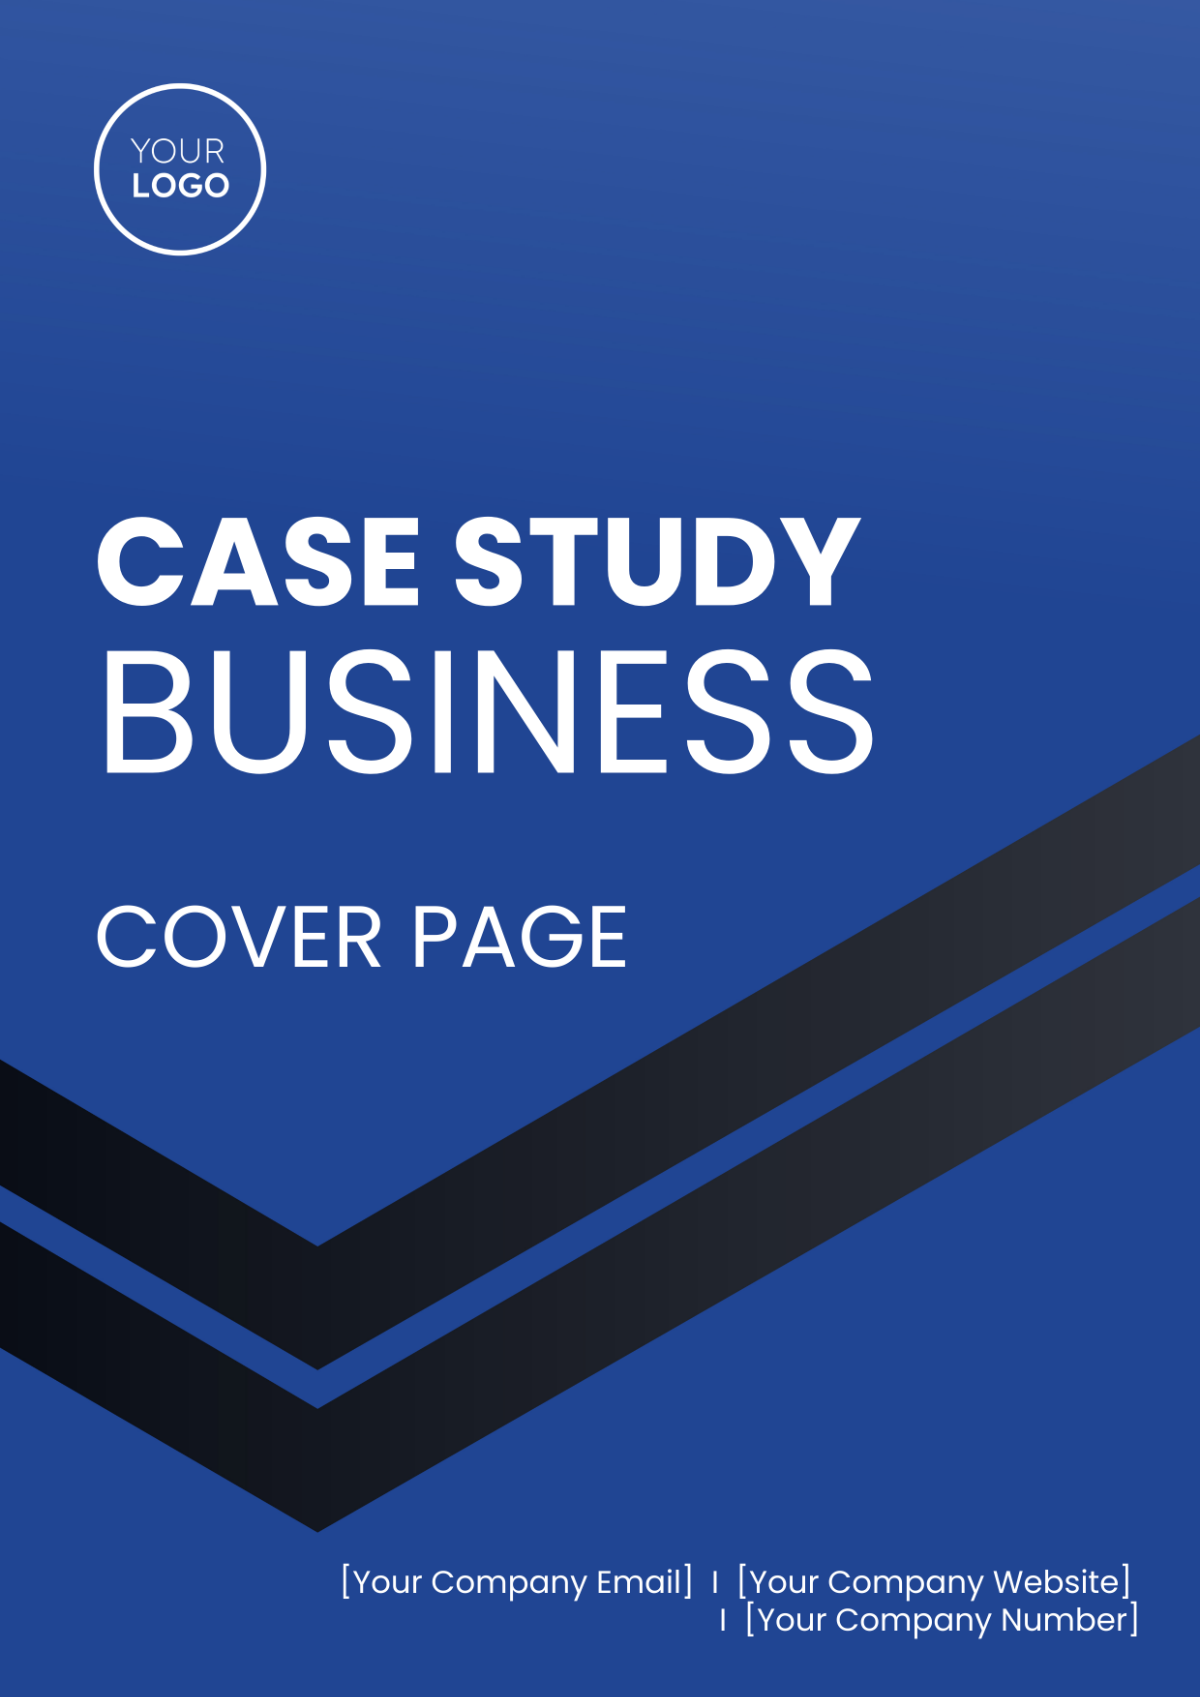 Case Study Business Cover Page